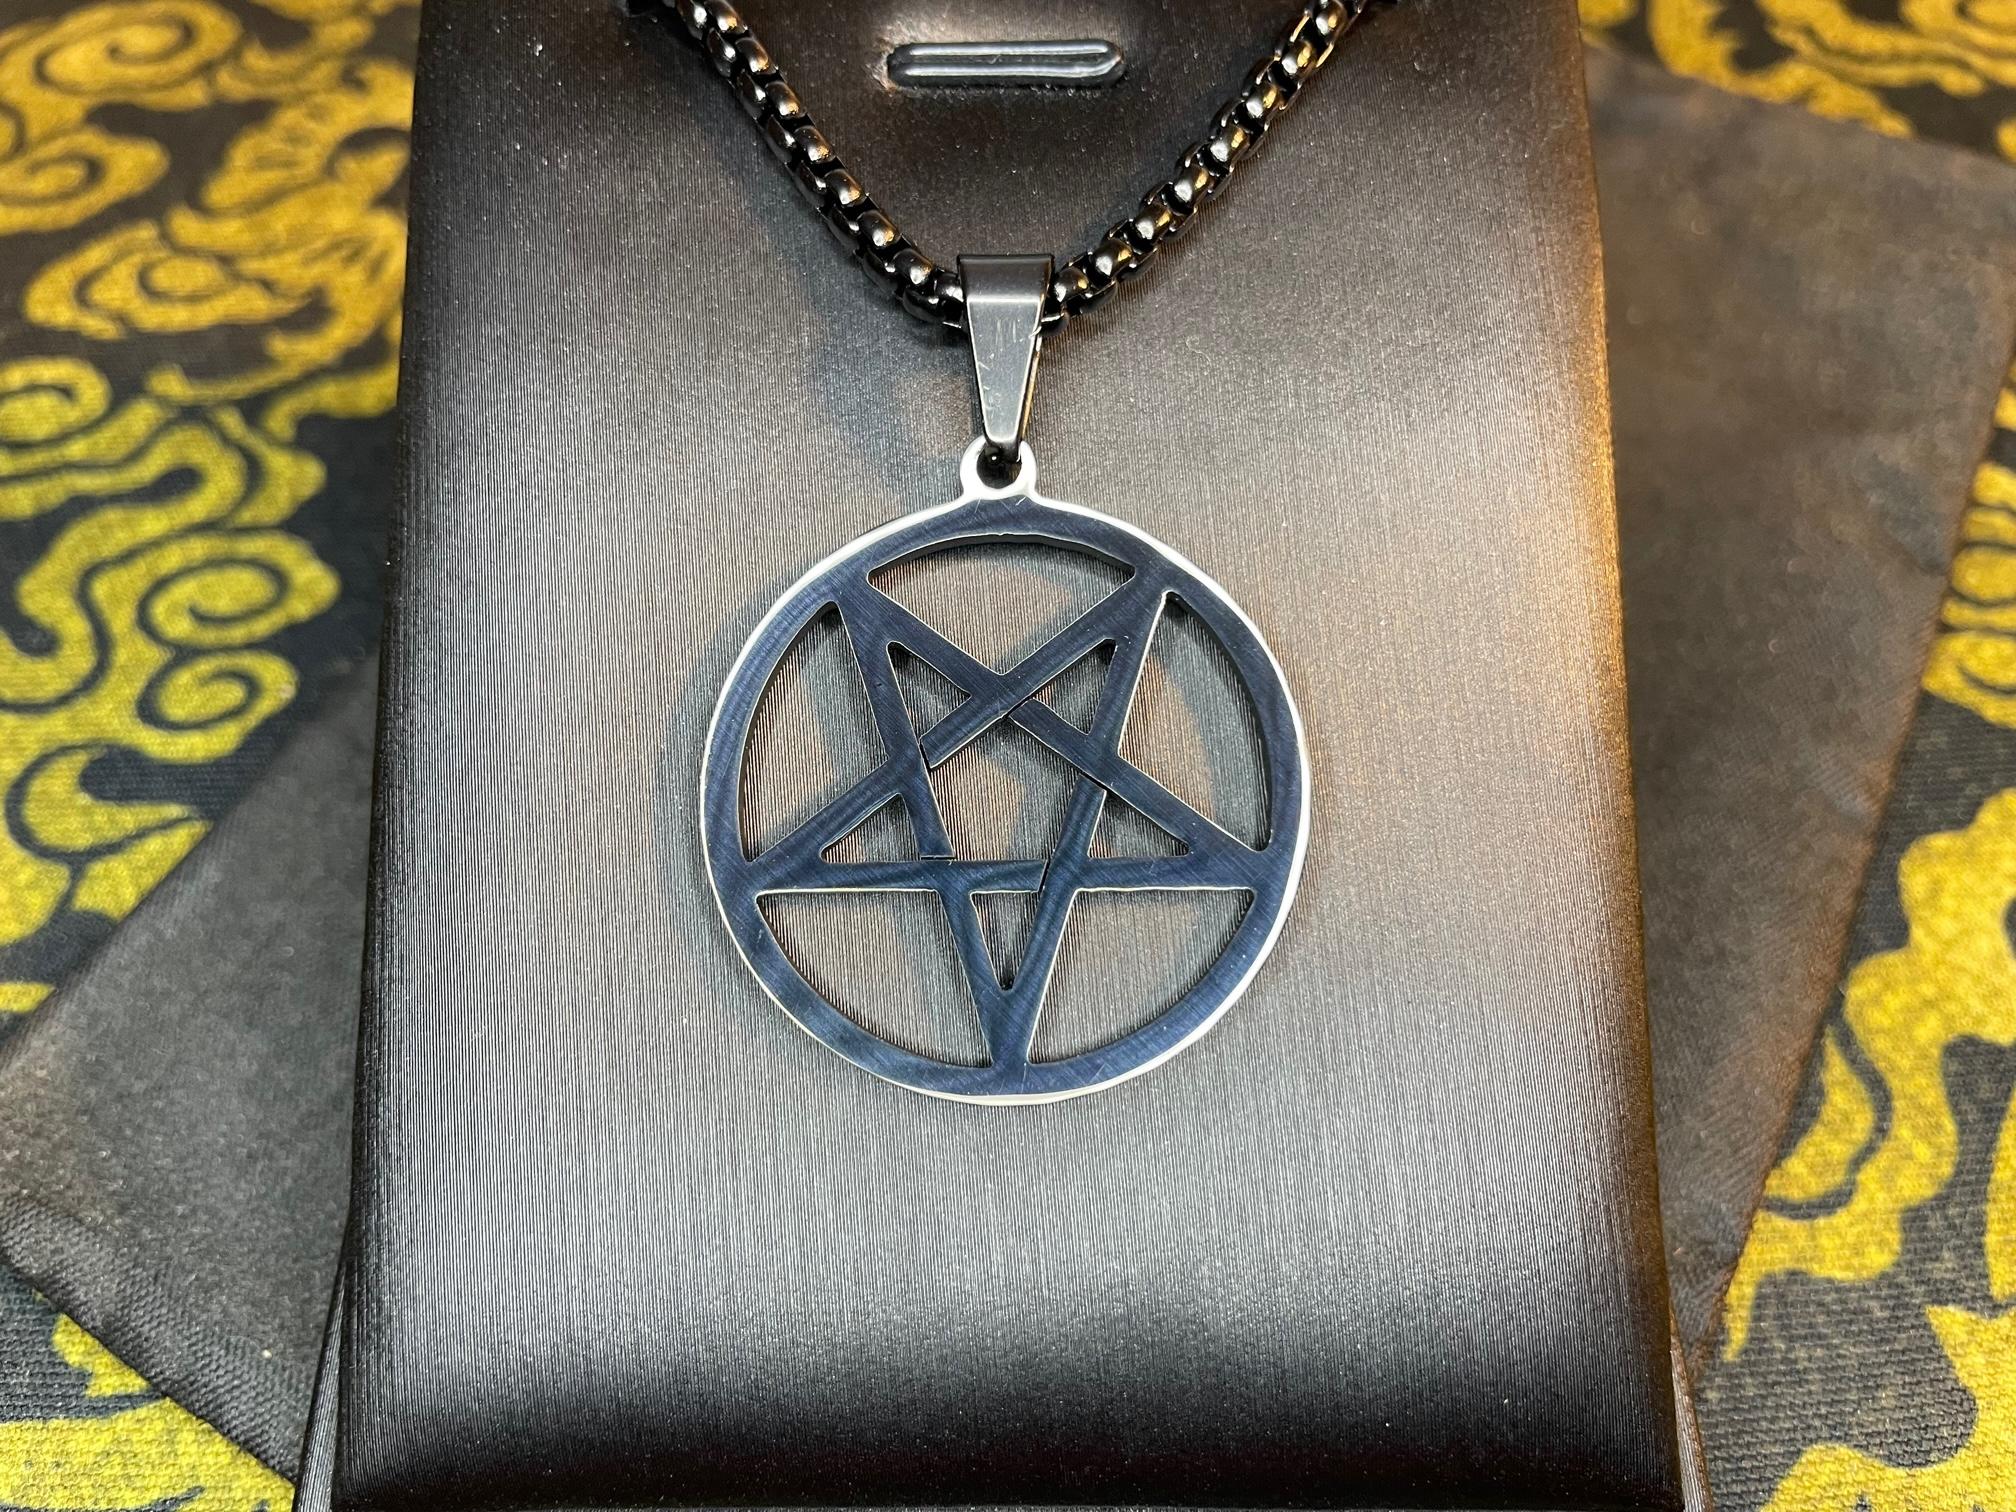 inverted pentagram upside down pendant necklace satanic temple wiccan church of satan occult darkness jewelry